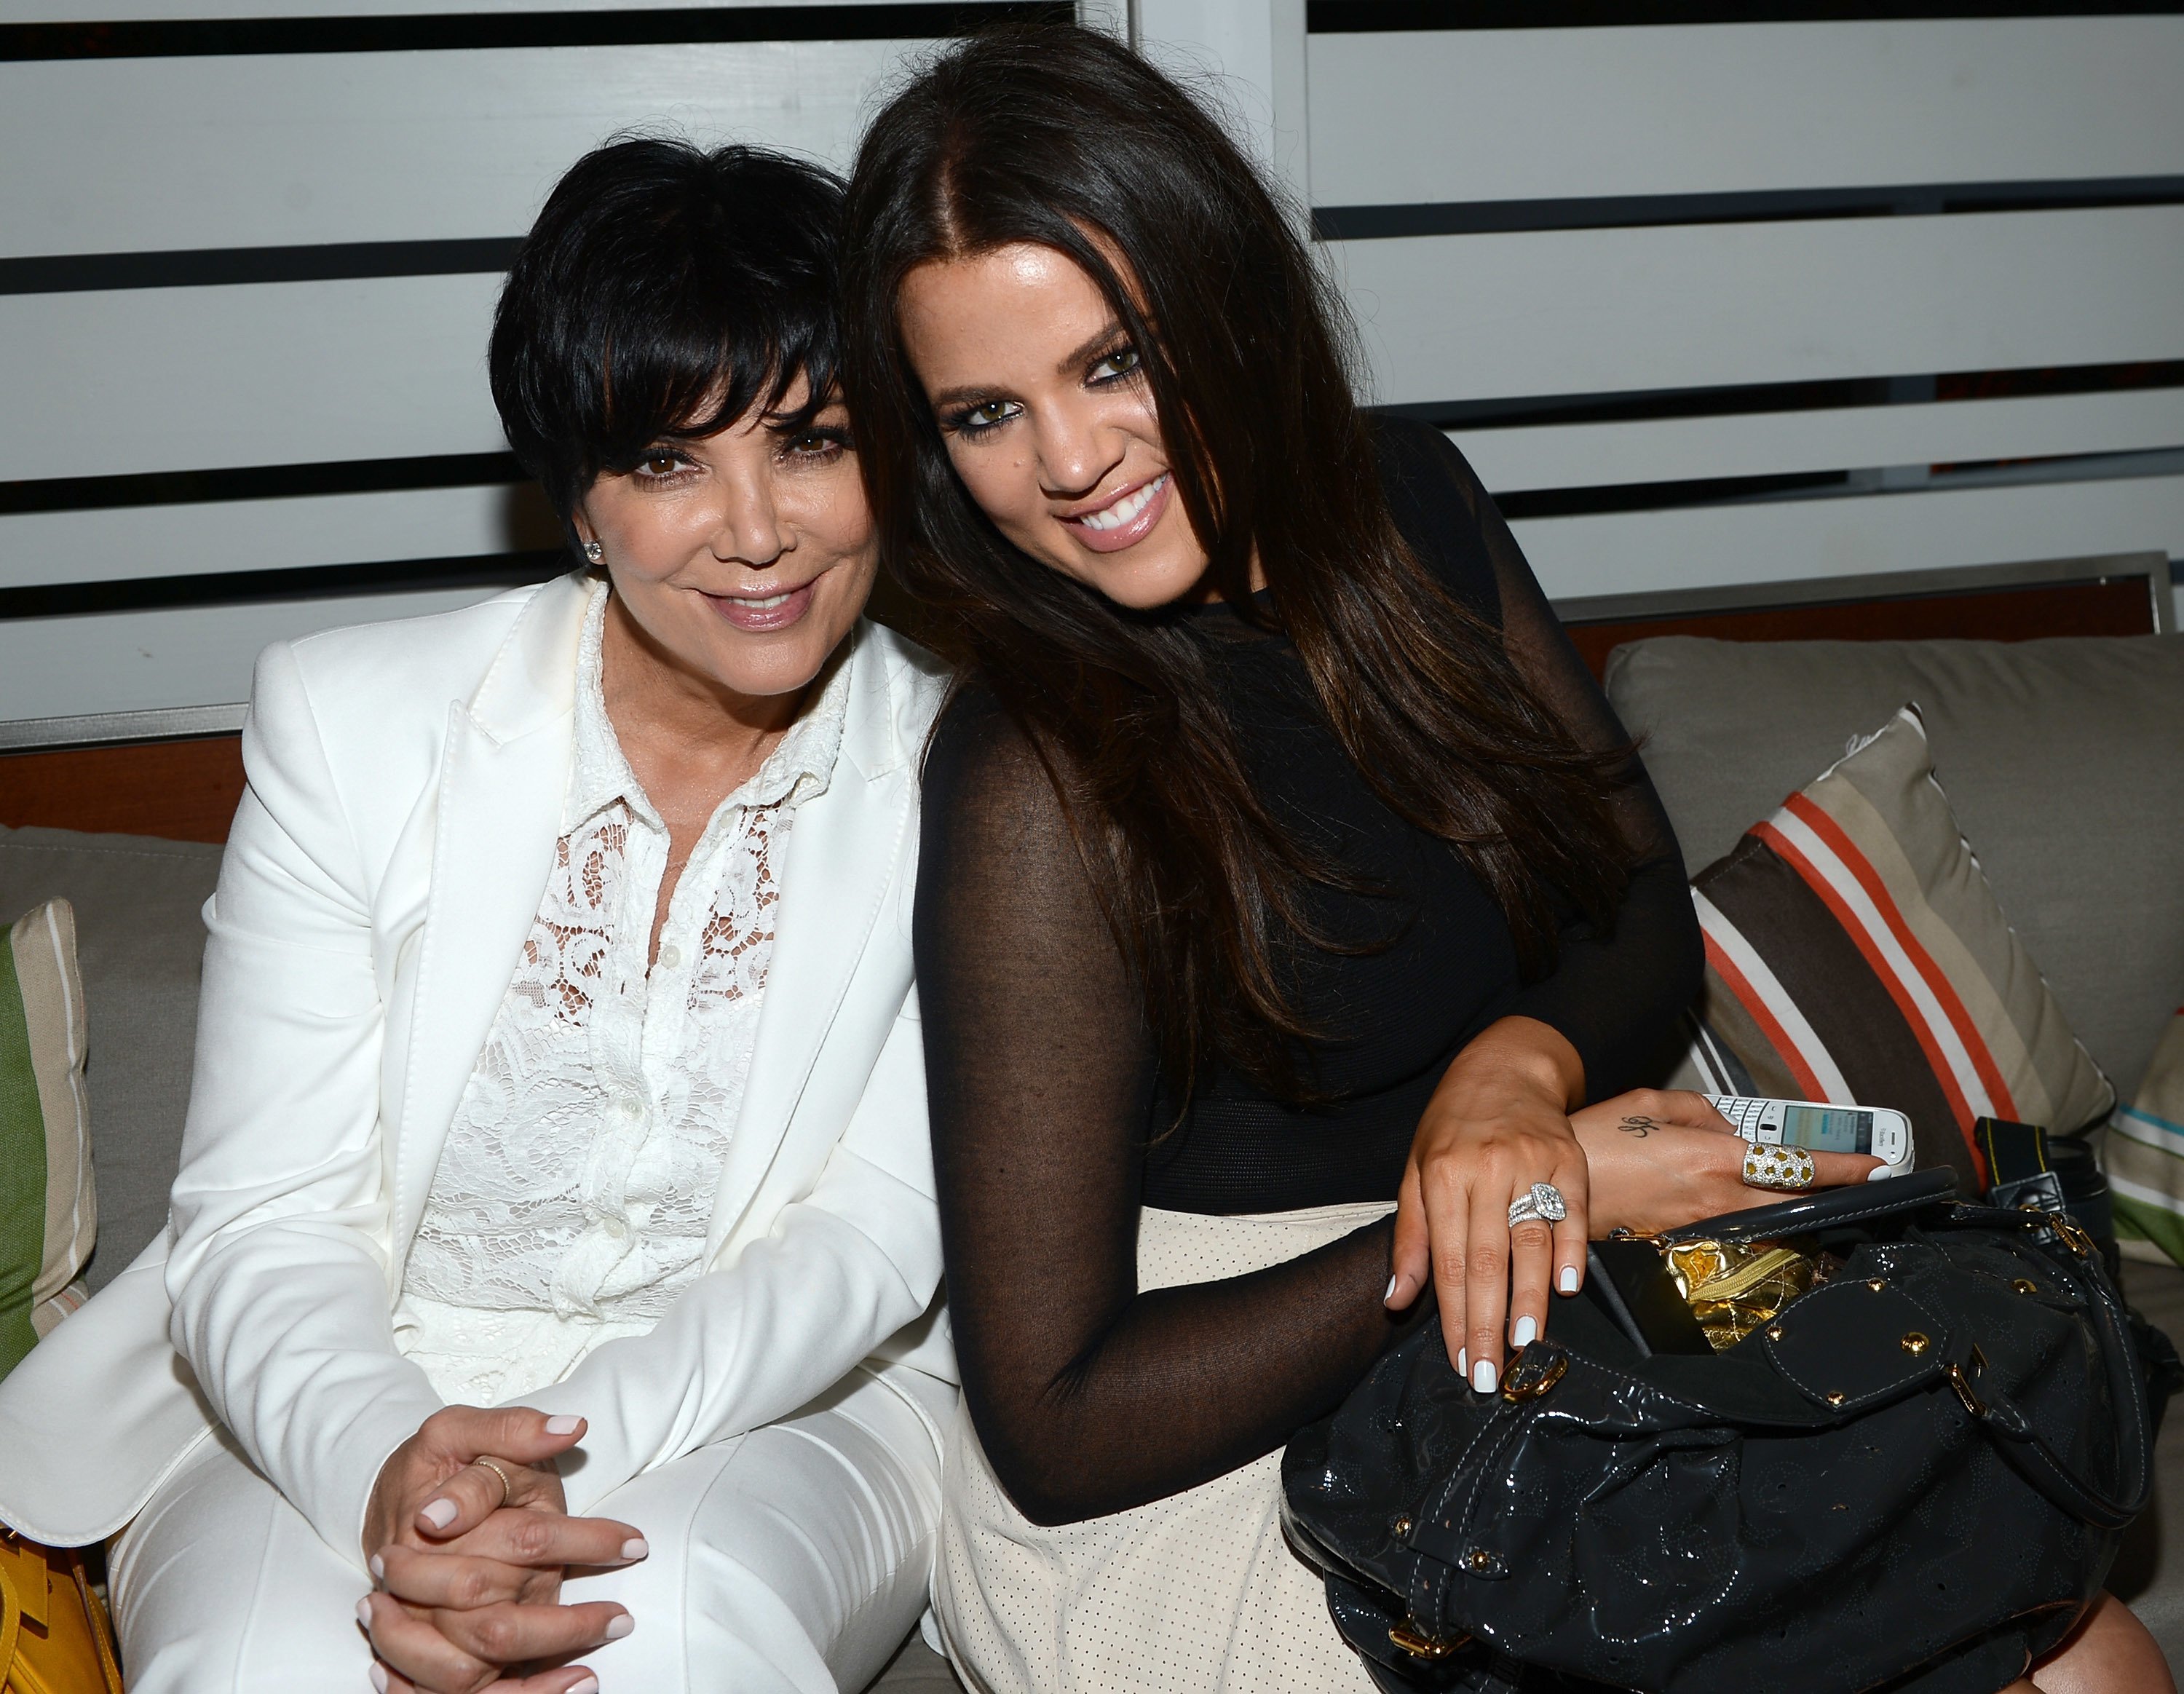 Kris Jenner and Khloe Kardashian at the 2012 Seventeen Magazine's September Issue Celebration | Source: Getty Images